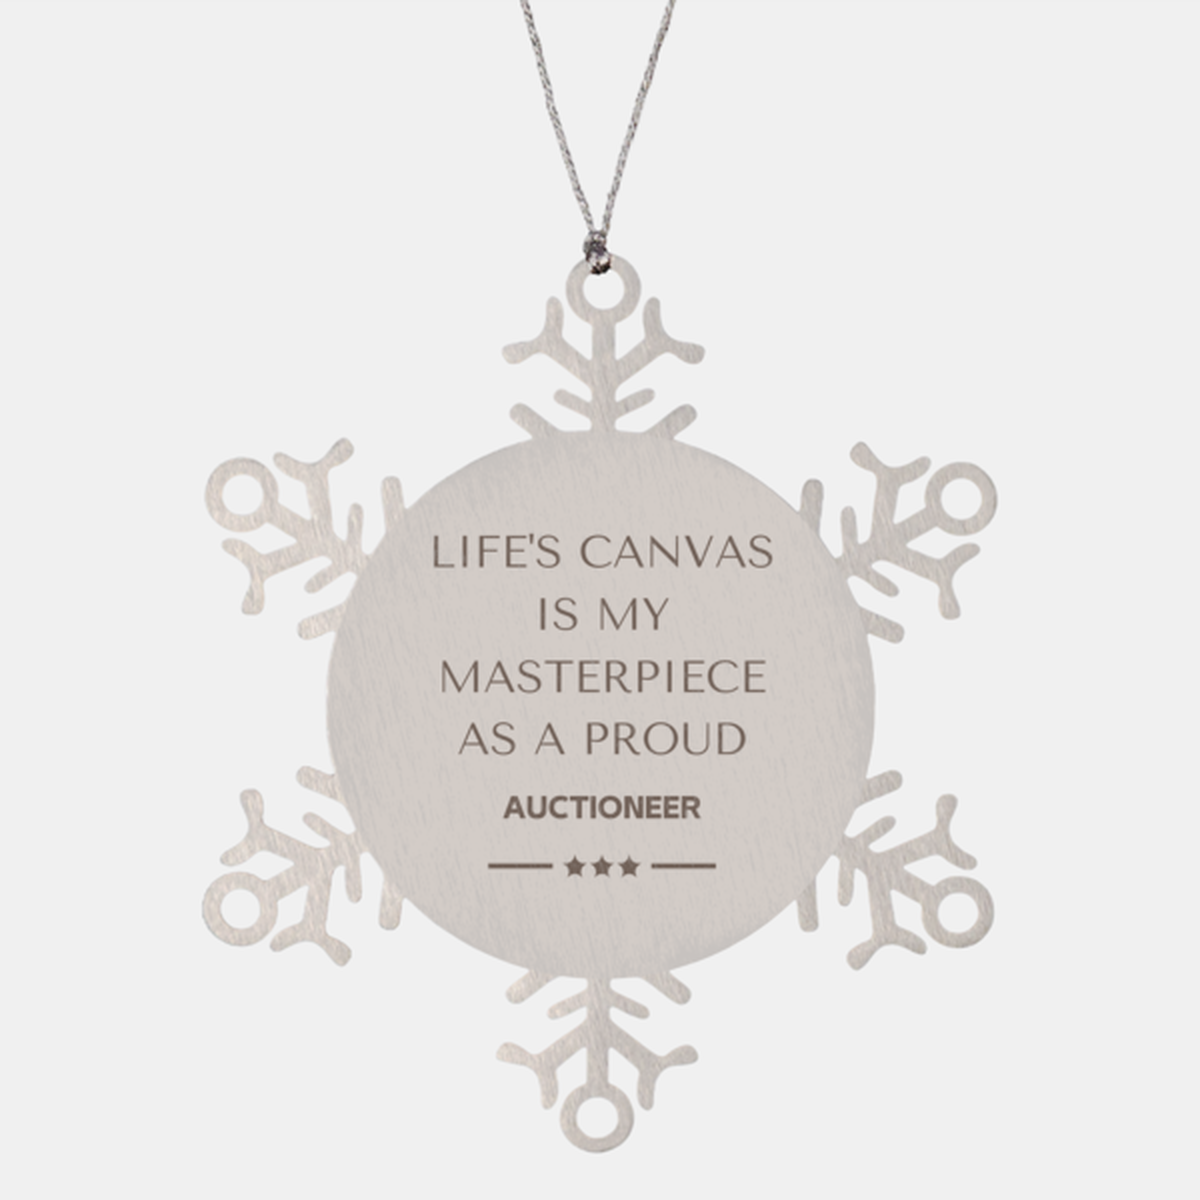 Proud Auctioneer Gifts, Life's canvas is my masterpiece, Epic Birthday Christmas Unique Snowflake Ornament For Auctioneer, Coworkers, Men, Women, Friends